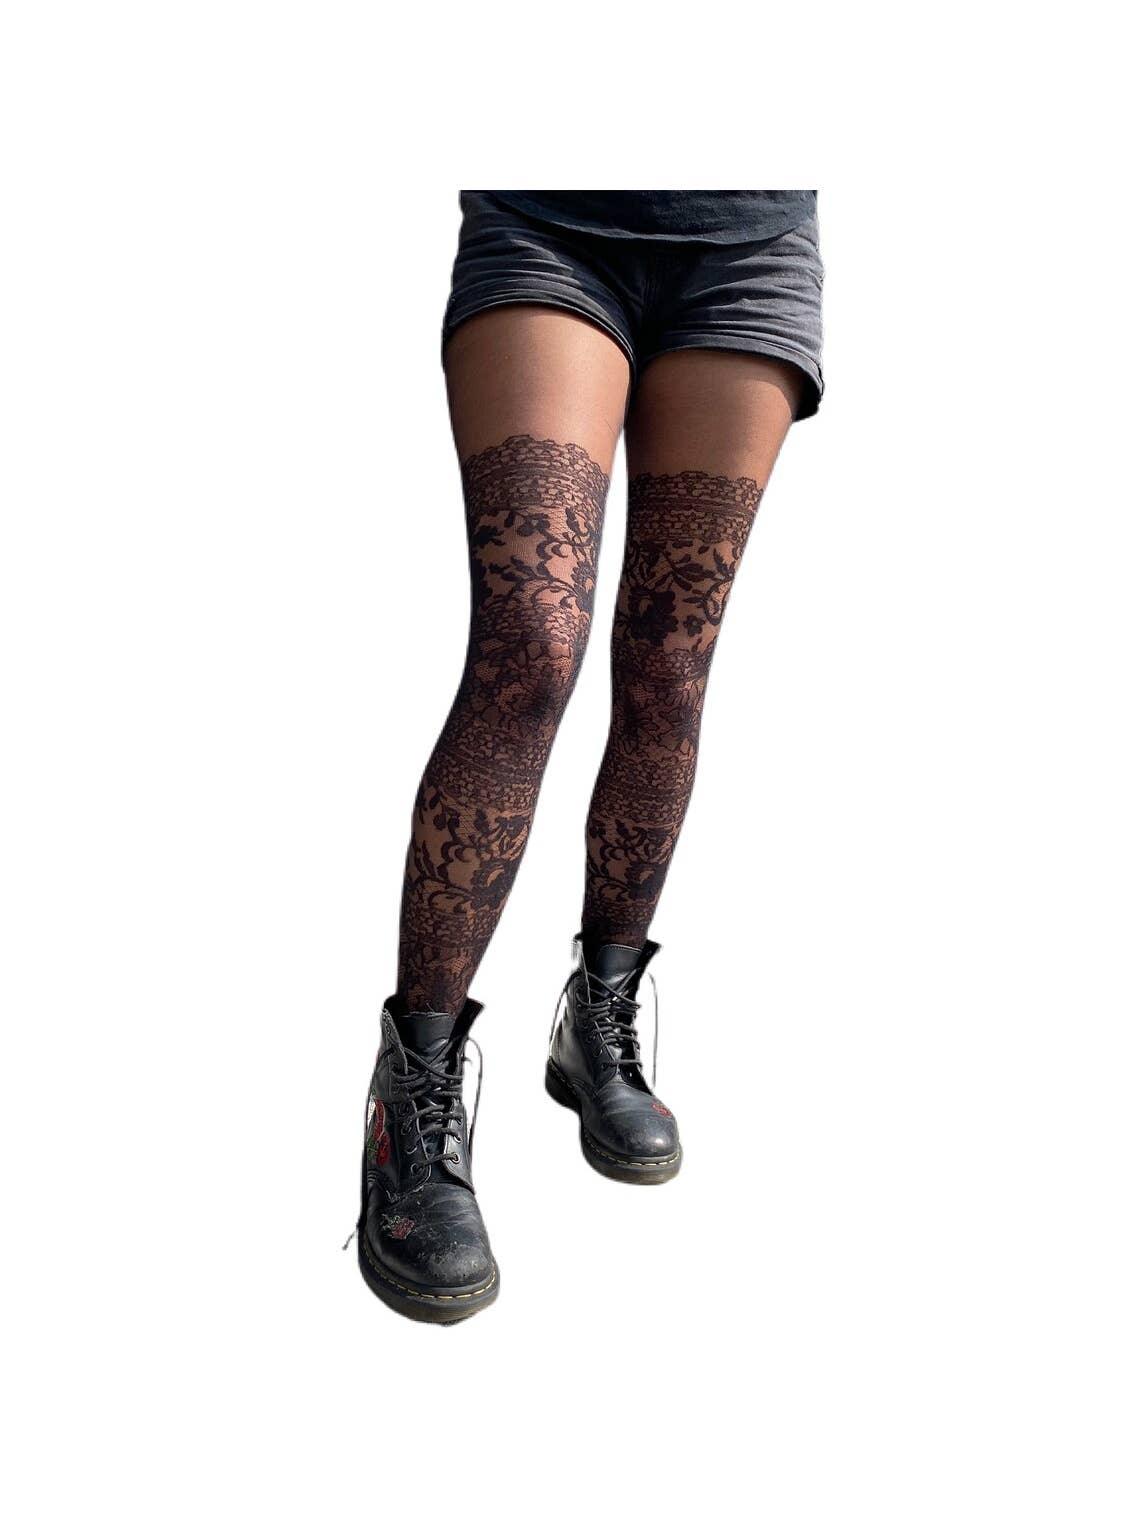 Black Lace sheer Illusion Thigh High Tights - Malka Chic - The Sock Monster